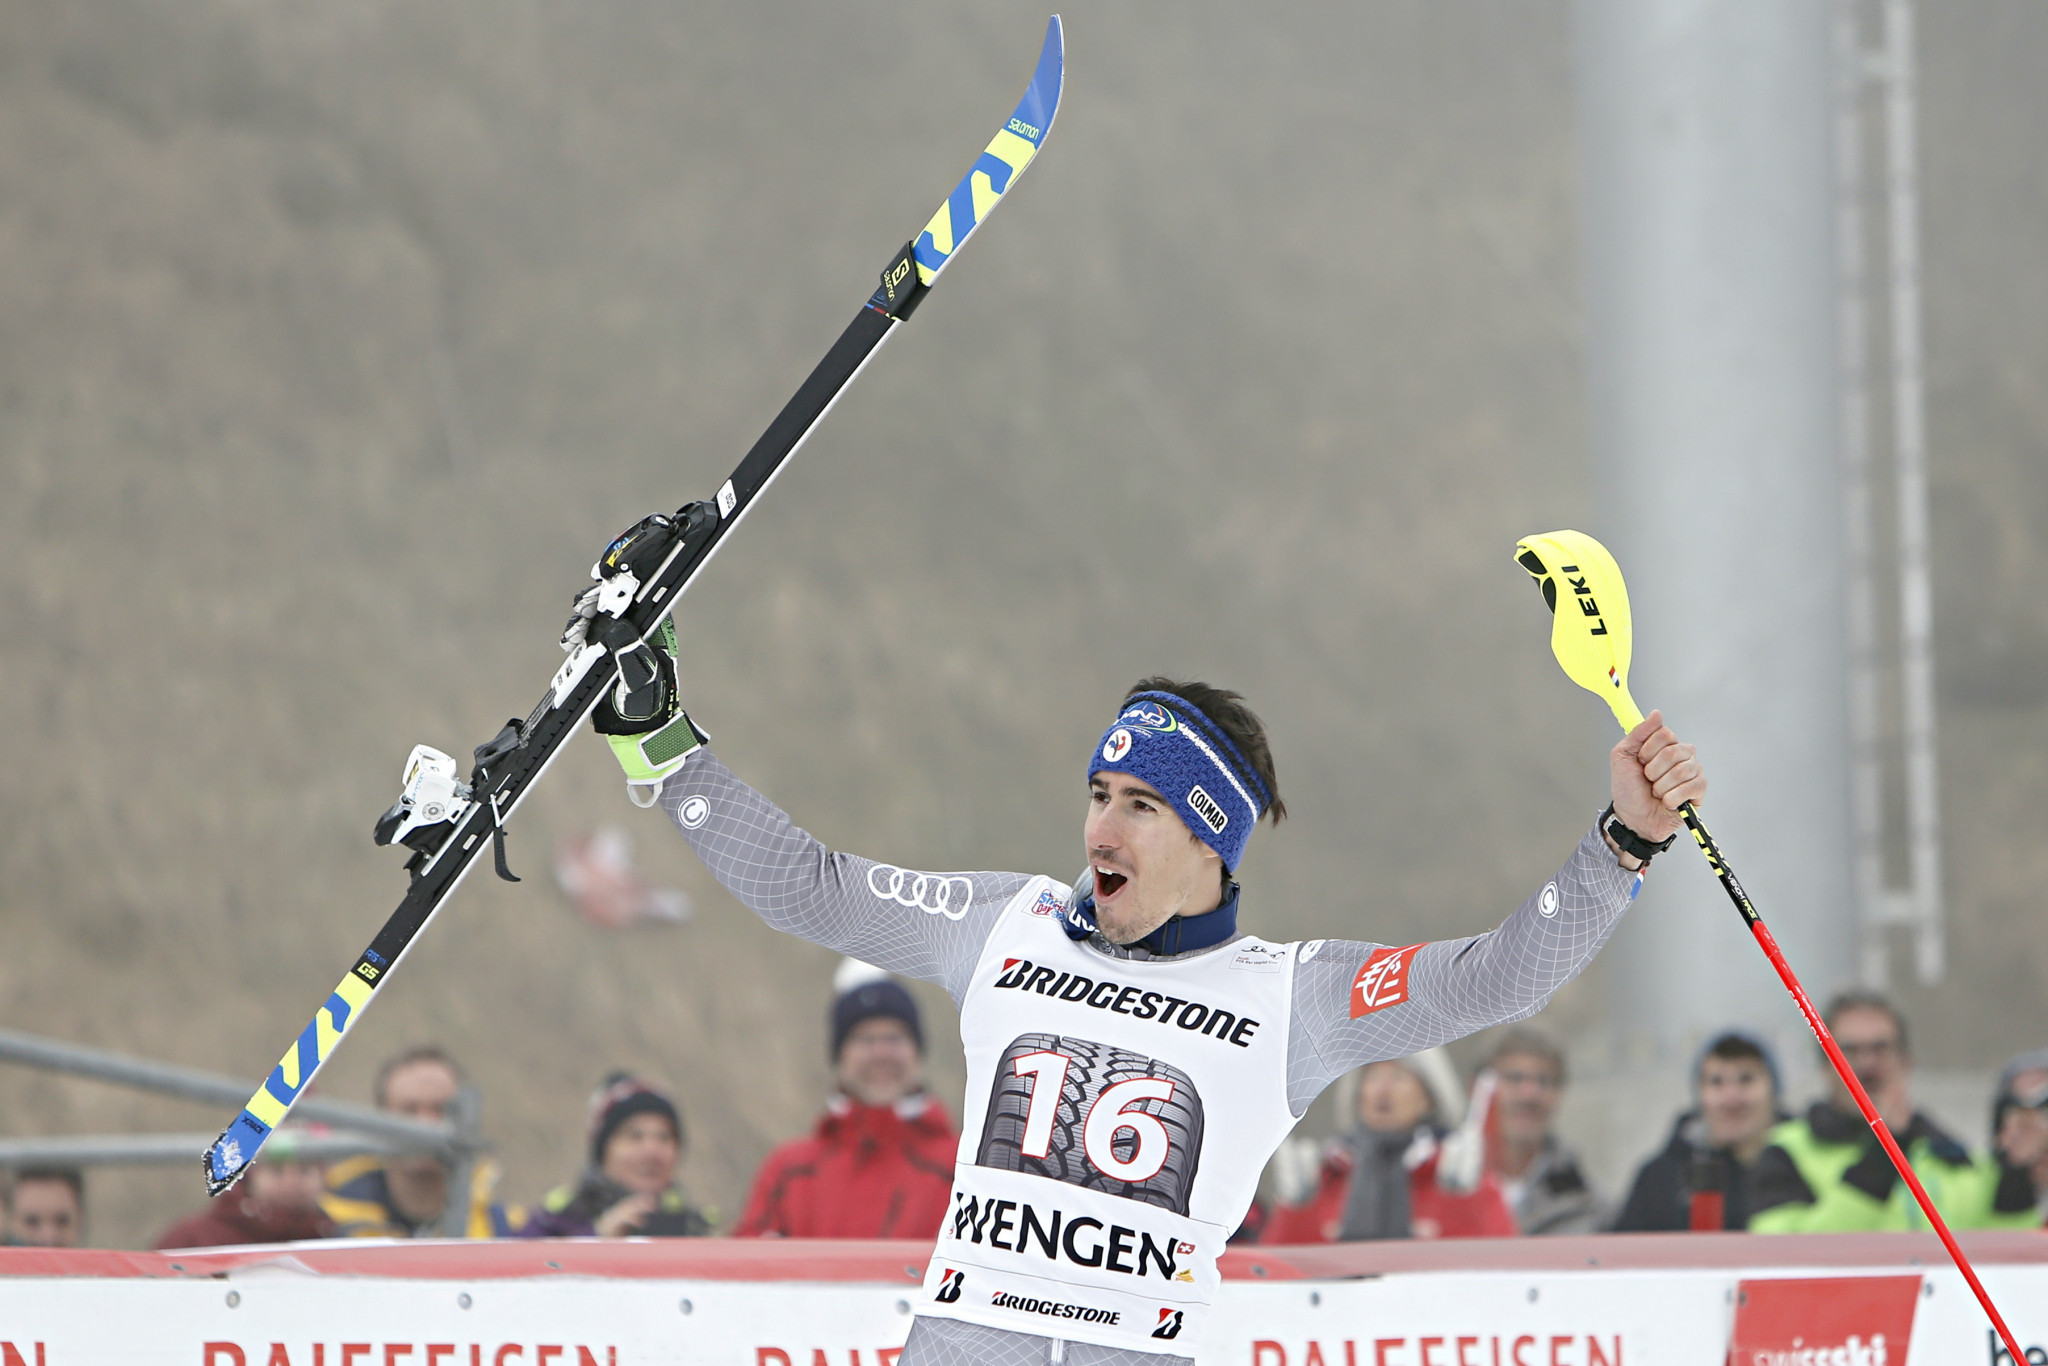 Muffat-Jeandet claims first Alpine Skiing World Cup win in Wengen